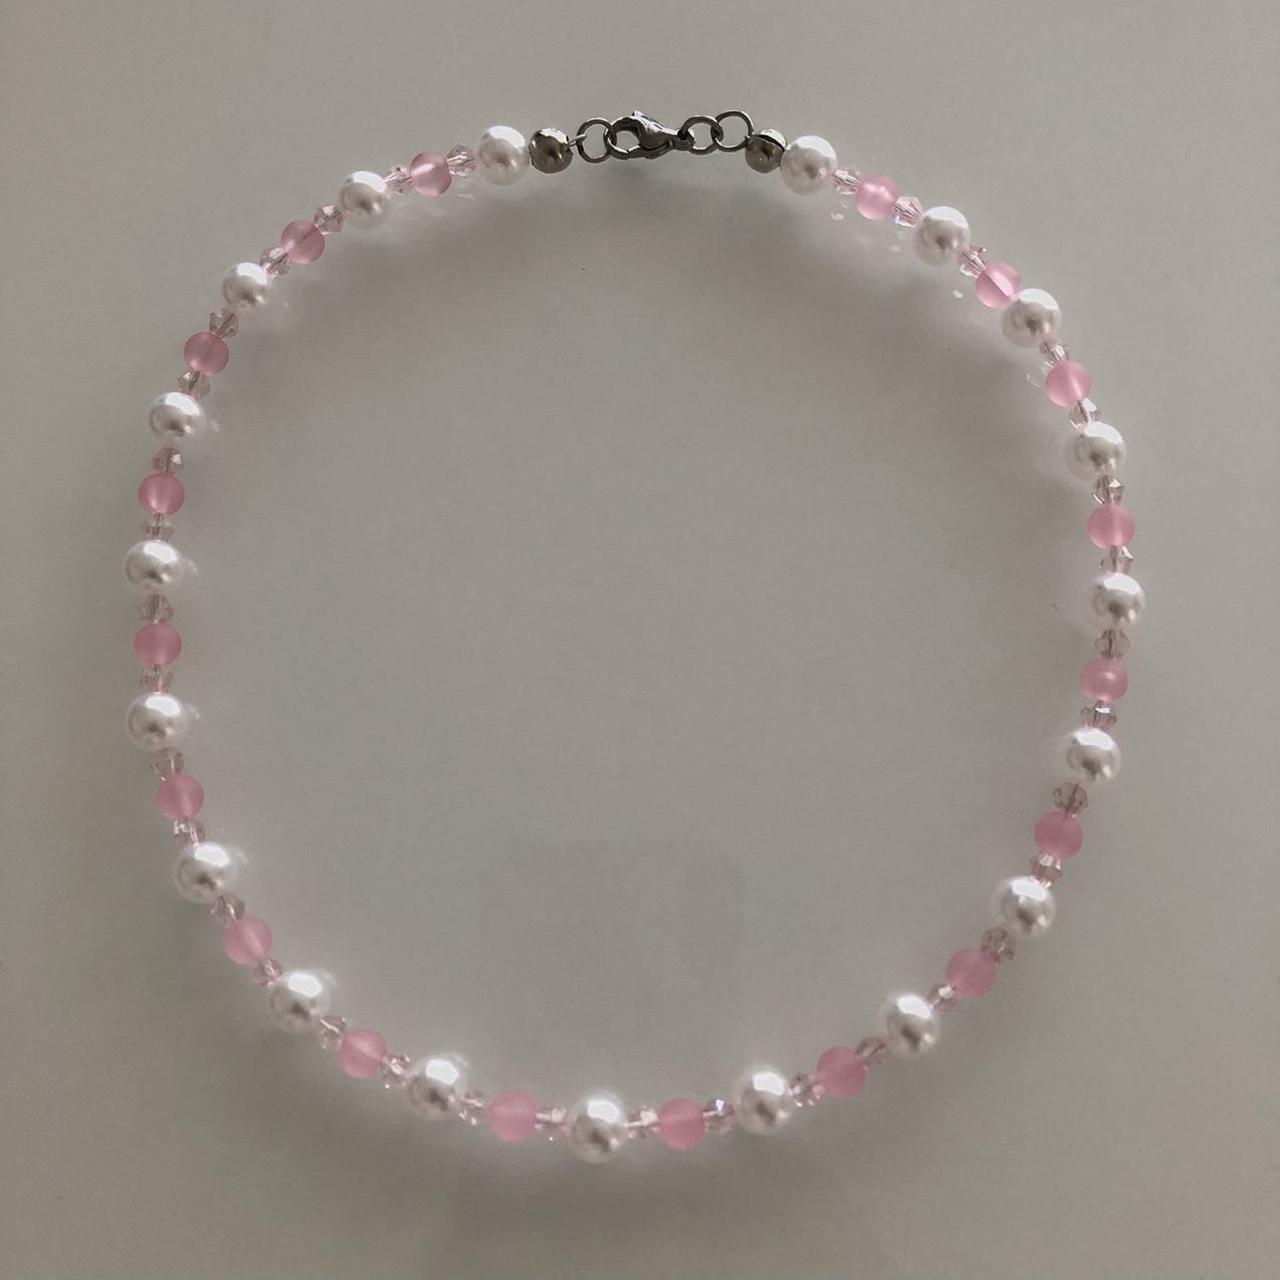 ♡Handmade beaded necklace made with stainless steel... - Depop